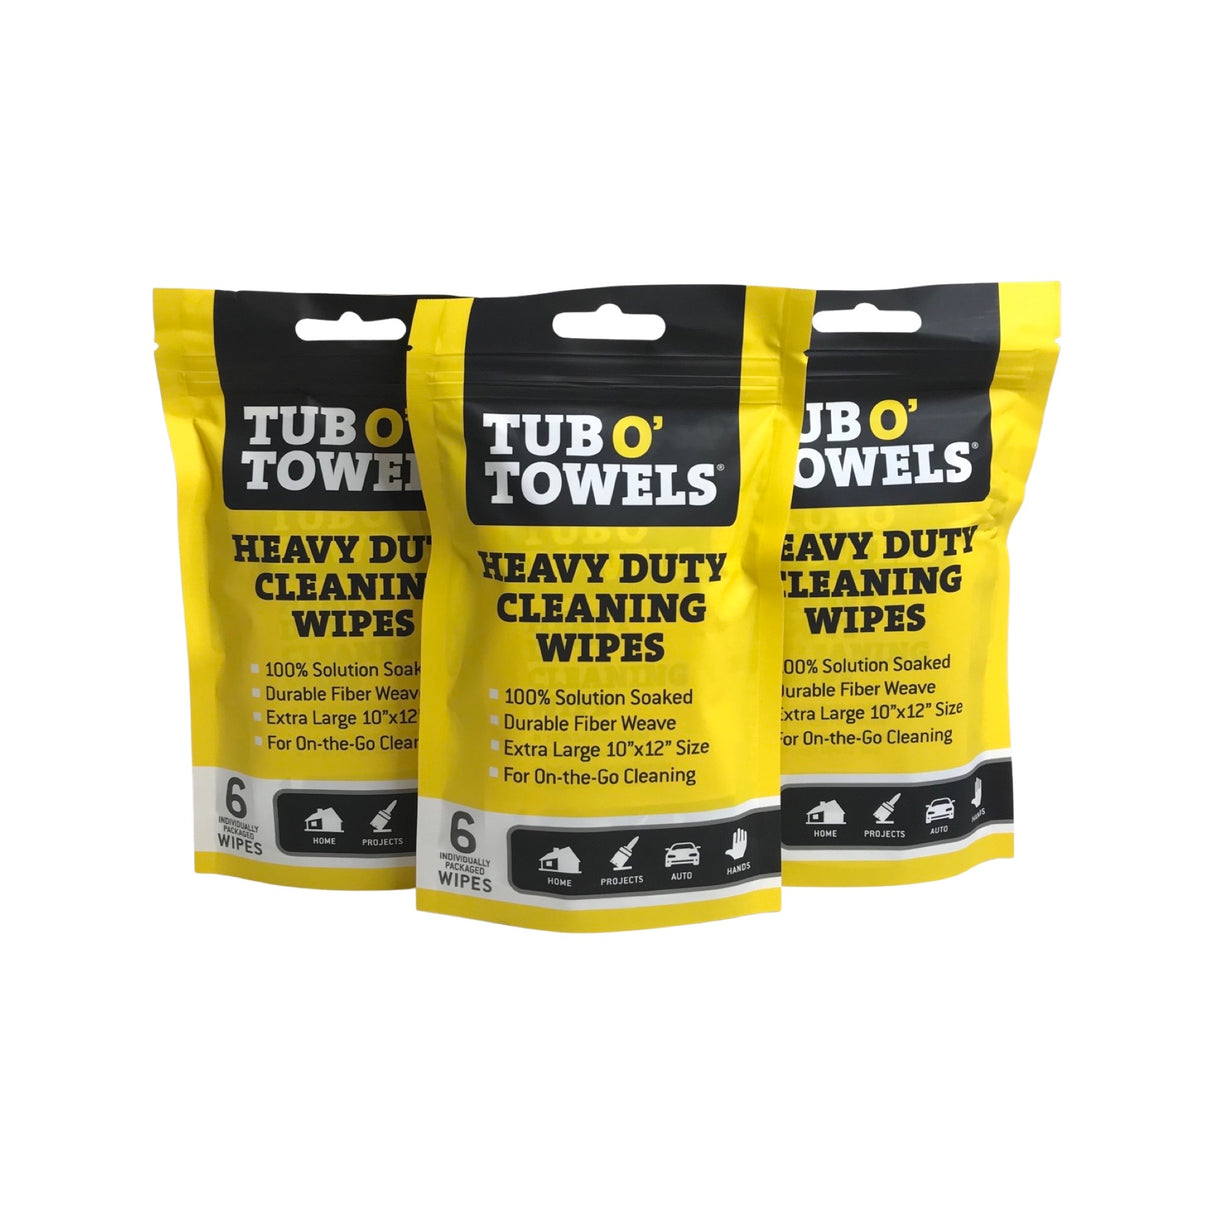 Tub O' Towels TW01-6 - 3 Pack Heavy Duty Multi-Surface Cleaning Wipes - Resealable